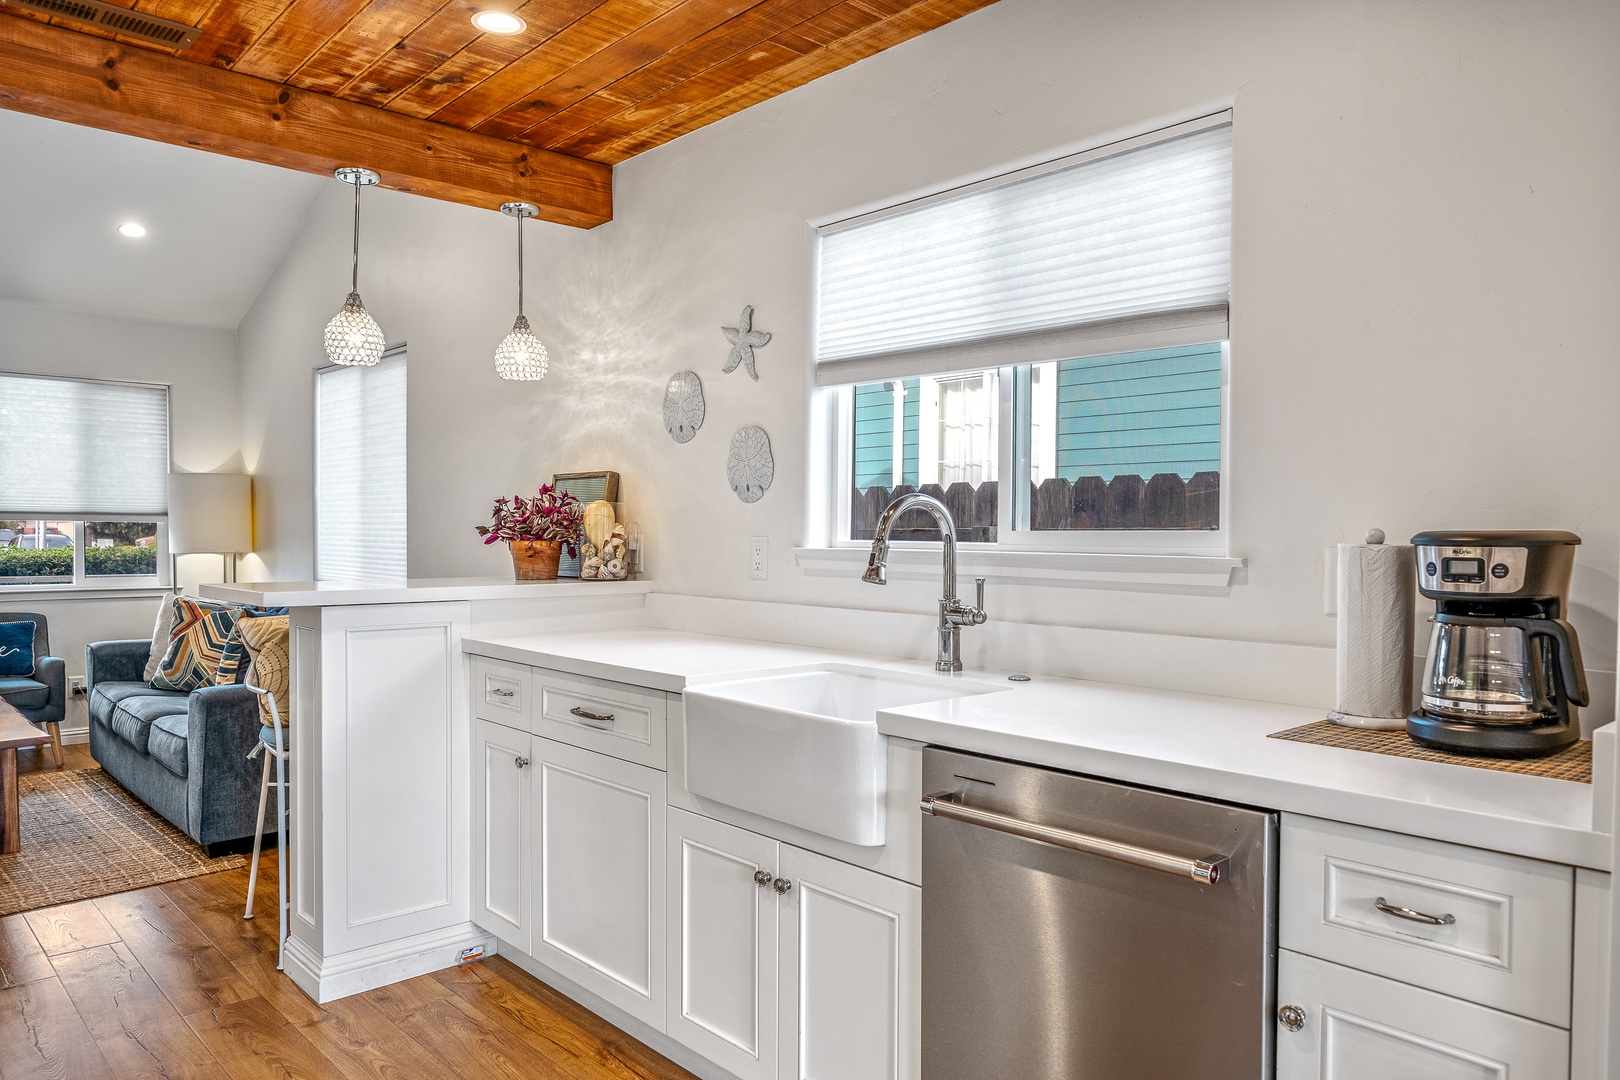 The gleaming coastal kitchen is spacious & offers all the comforts of home